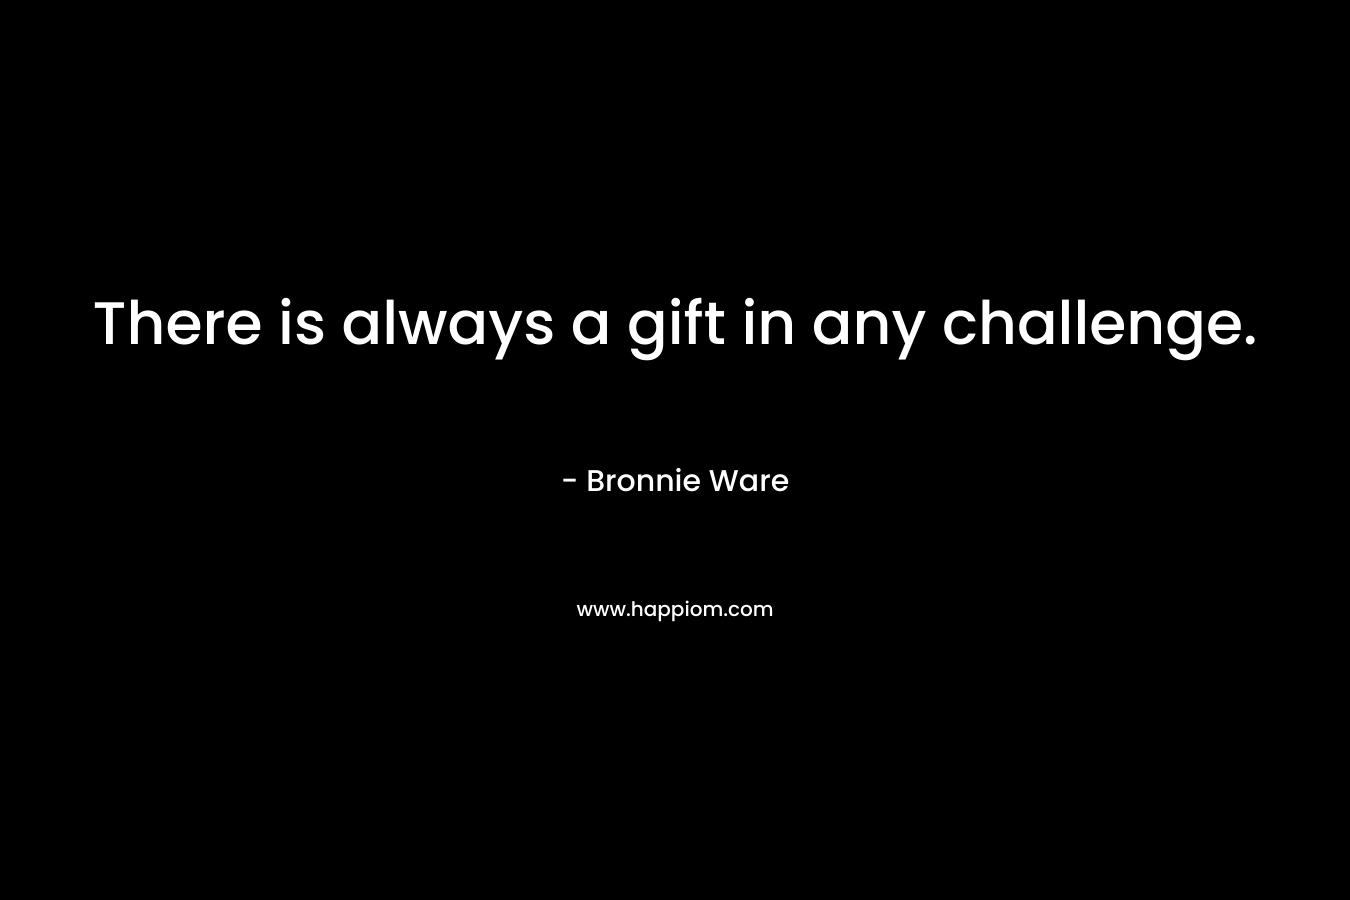 There is always a gift in any challenge. – Bronnie Ware